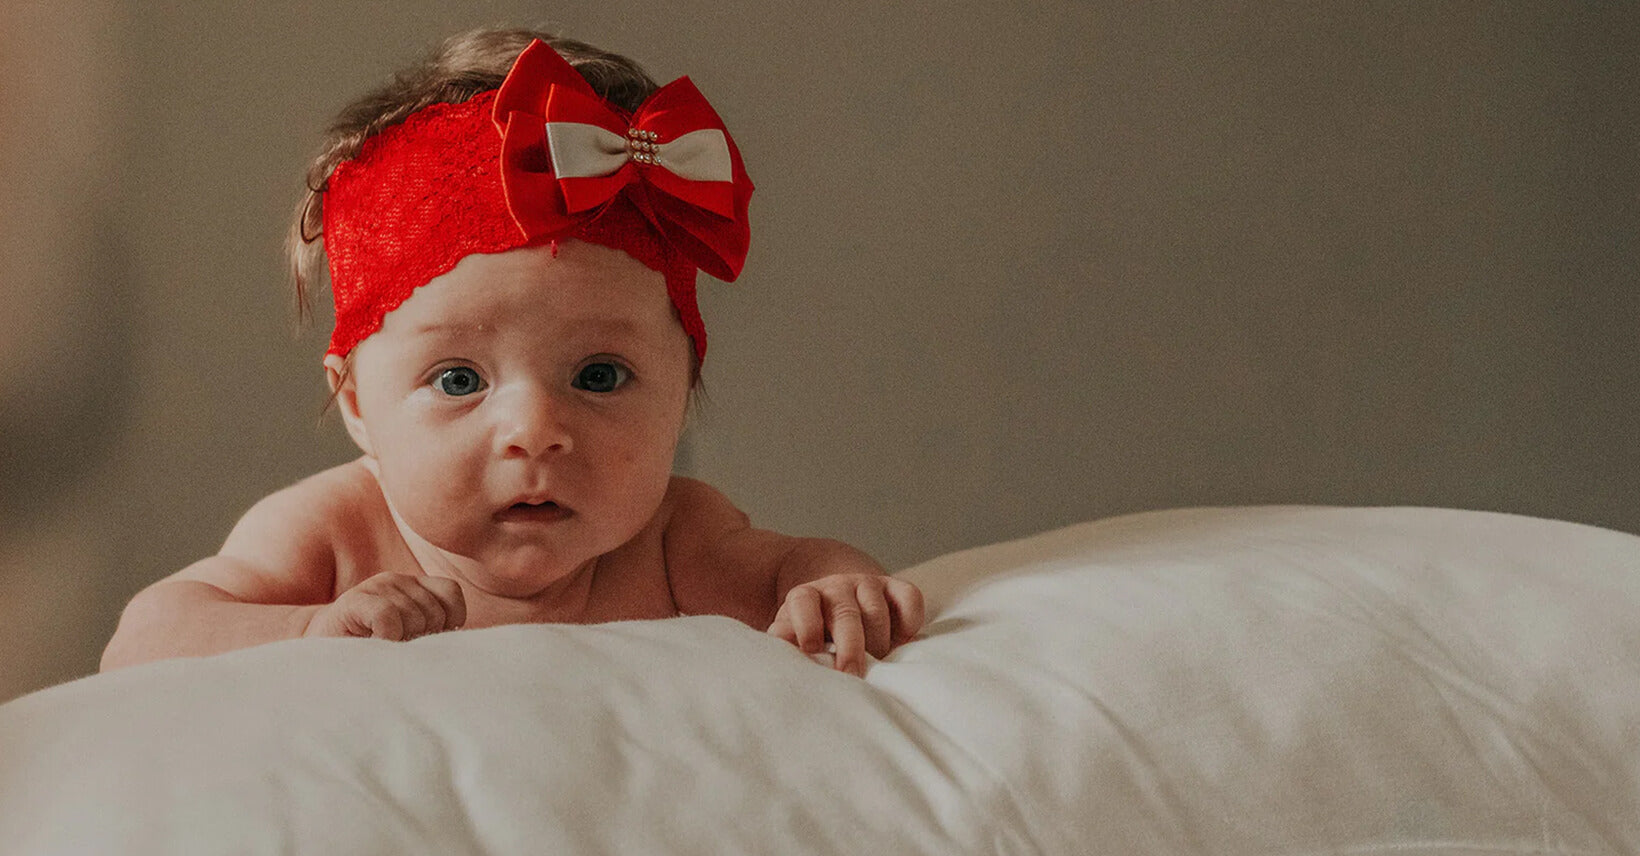 Keep The Baby Cool - How To Dress A Newborn In Summer